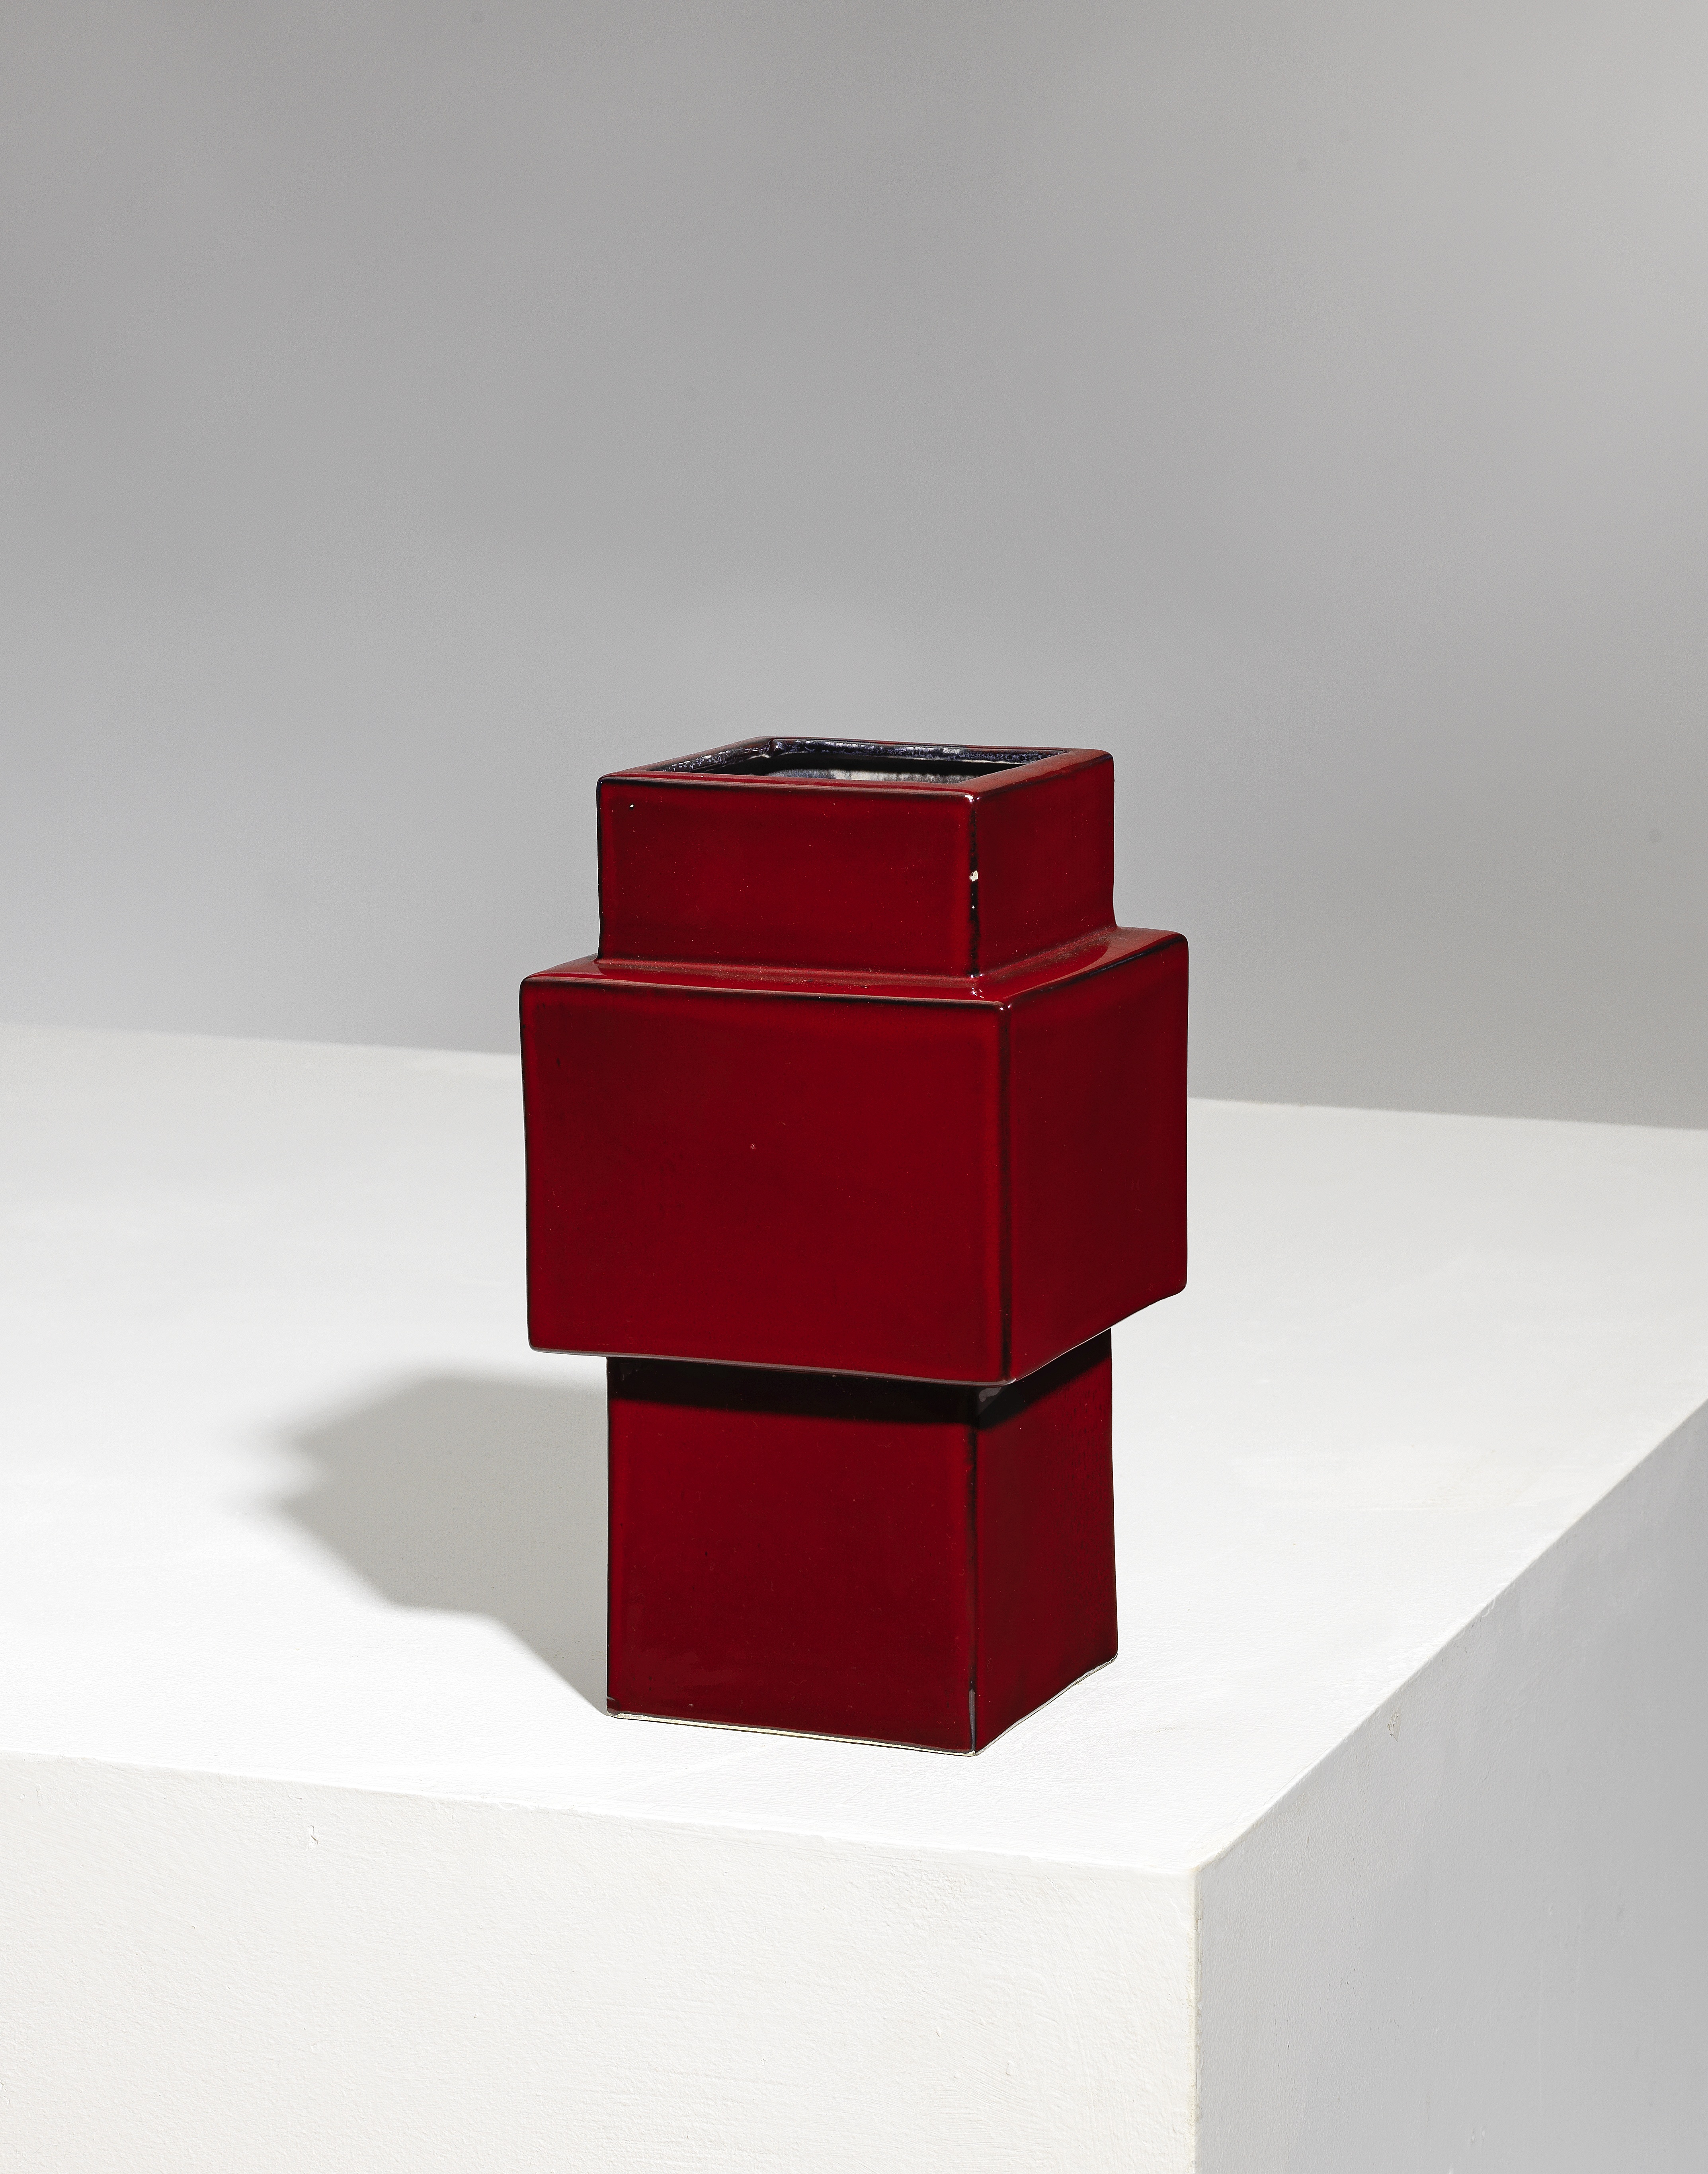 Ettore Sottsass JR. Vase, model no. 582, from the 'Colaggio' series, 1962-1963